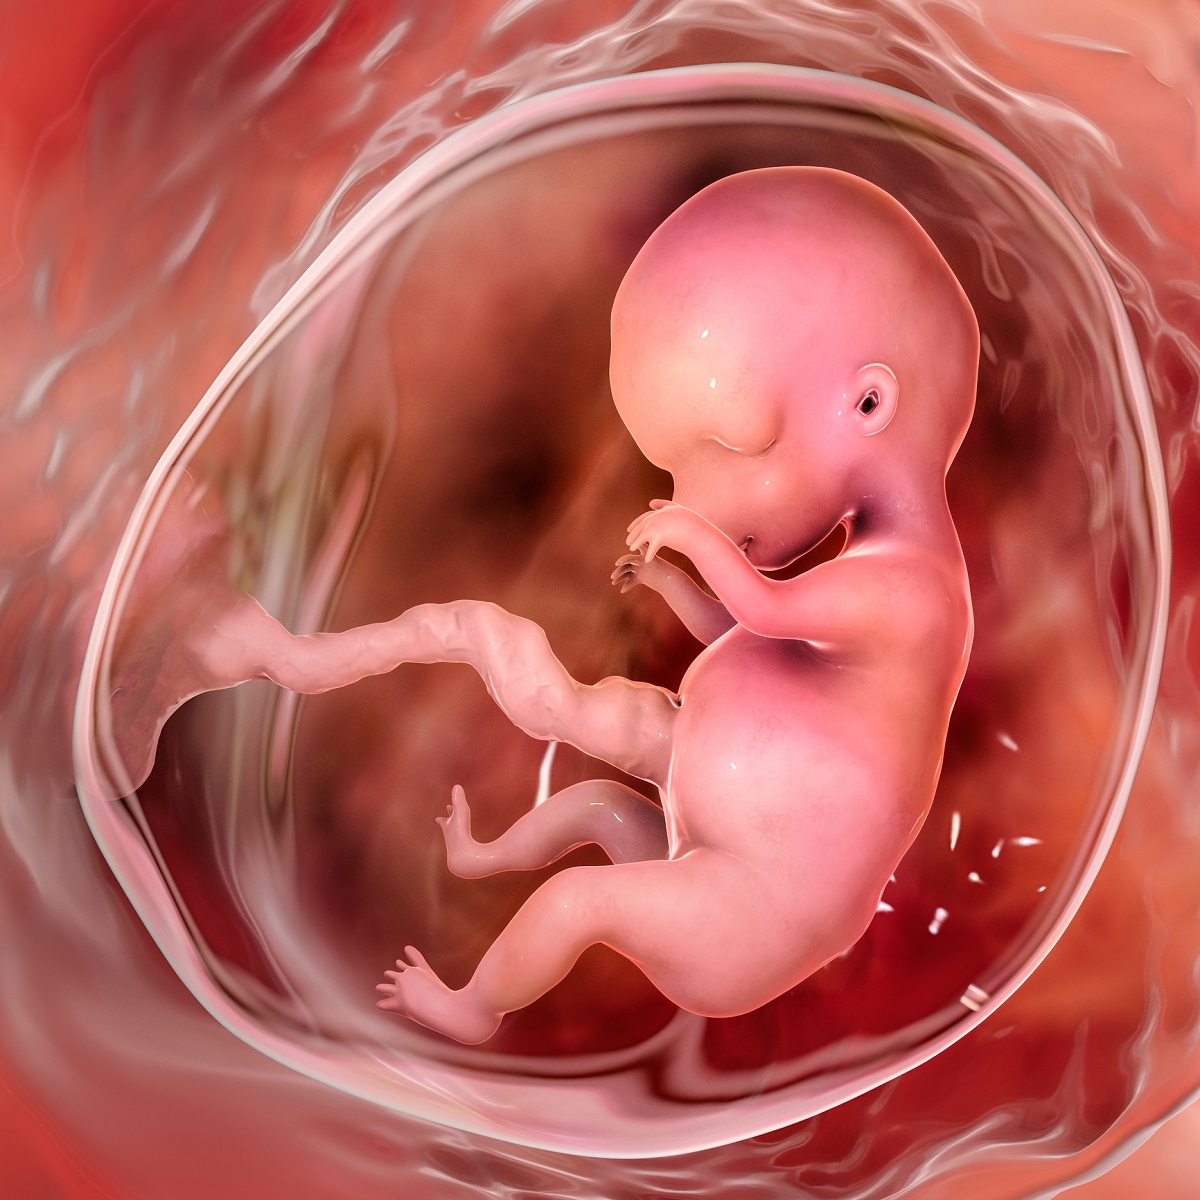 Embryo at the 9th week of pregnancy. Source: Getty Images